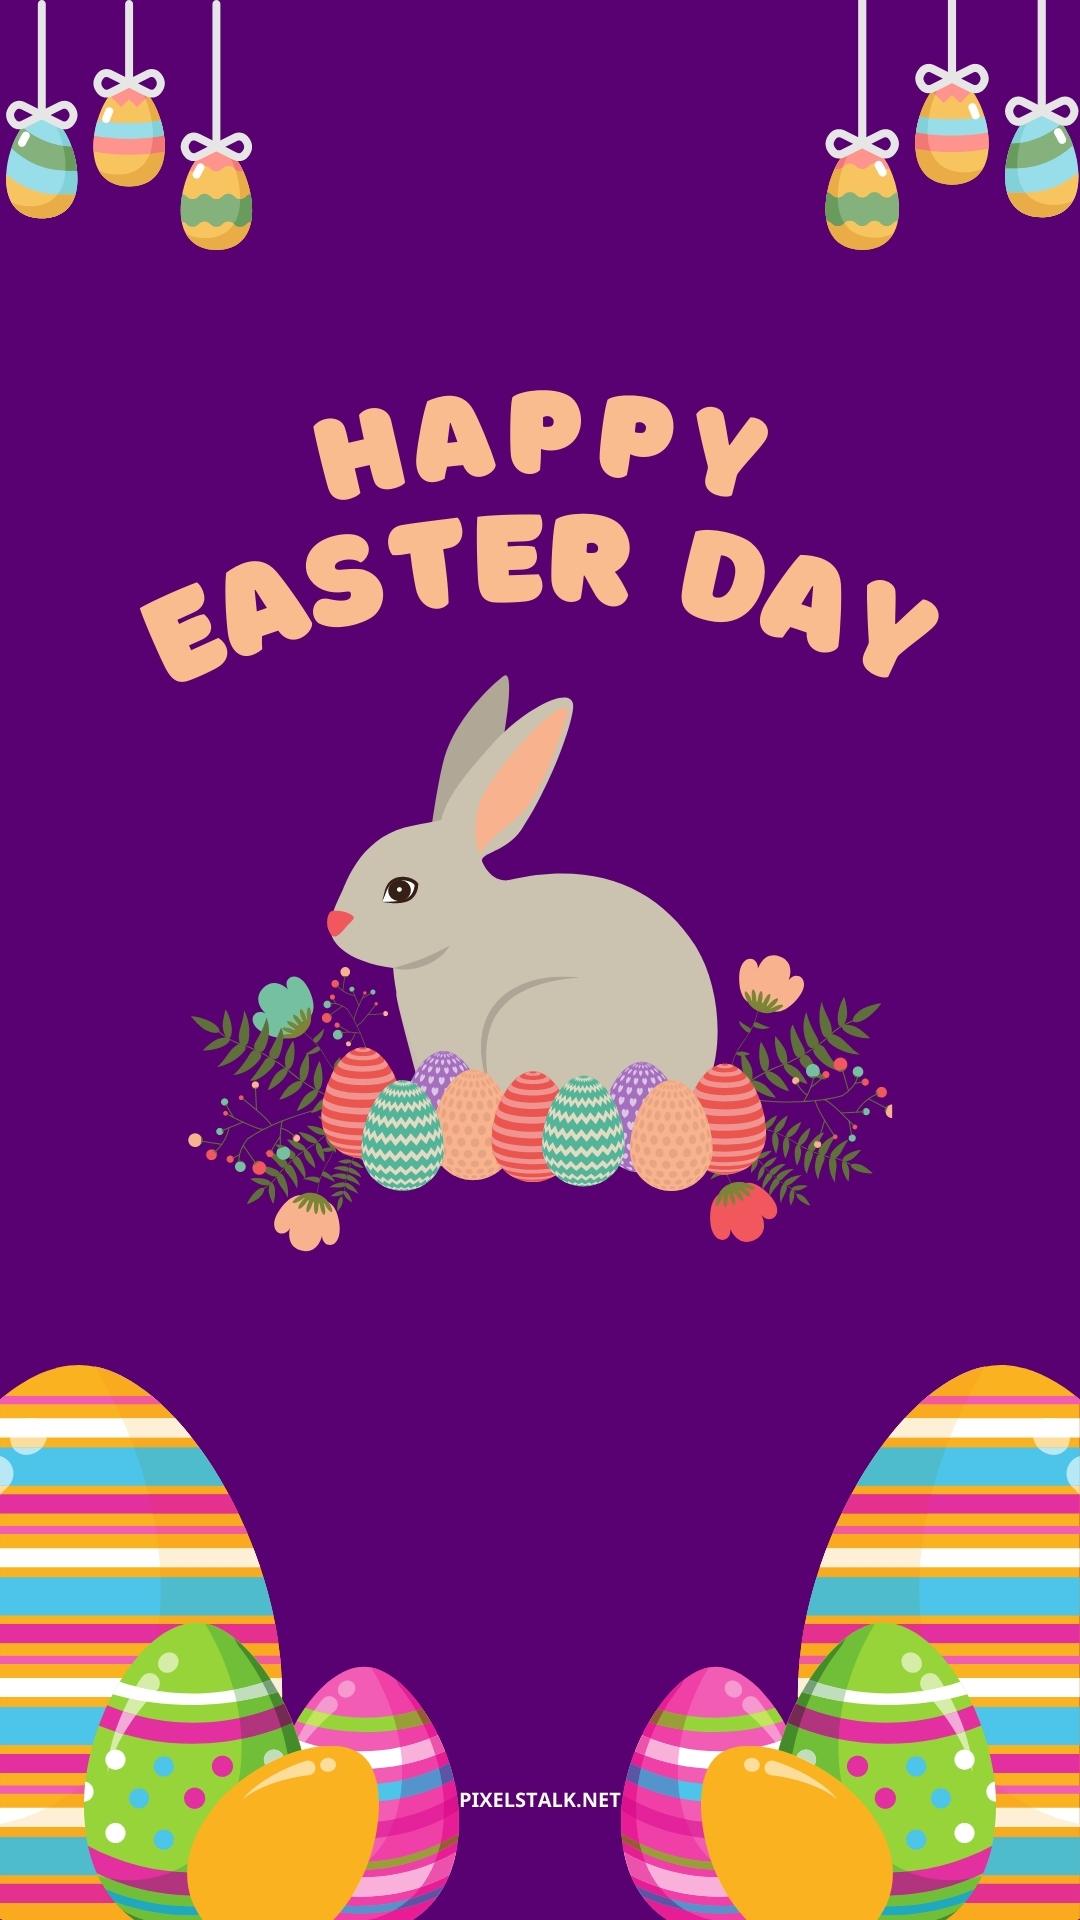 Download Happy Easter Iphone Wallpaper In Hd Image